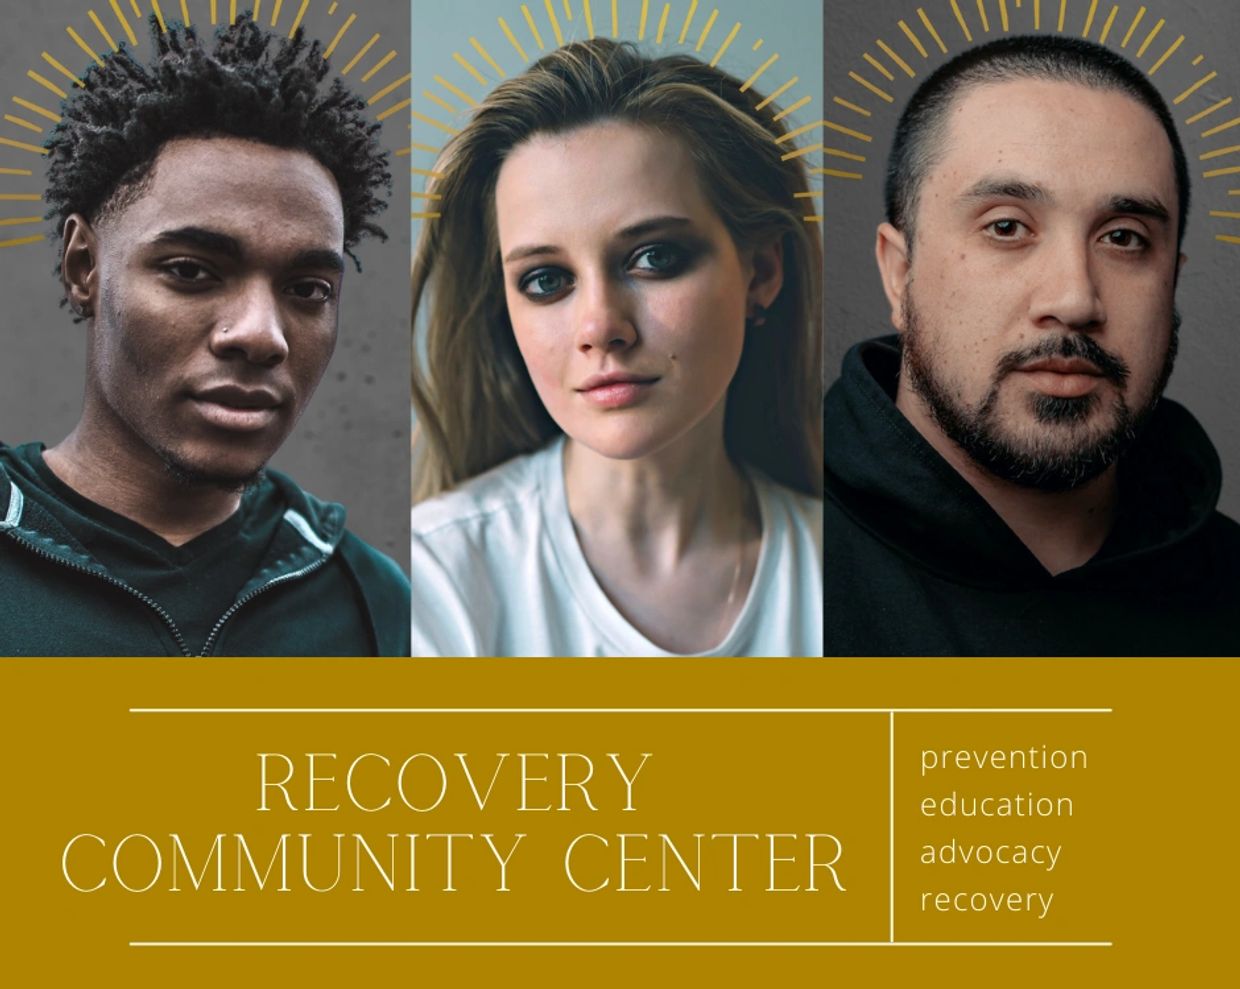 hope coalition recovery addiction help support peer recovery hope coalition Hendersonville recovery